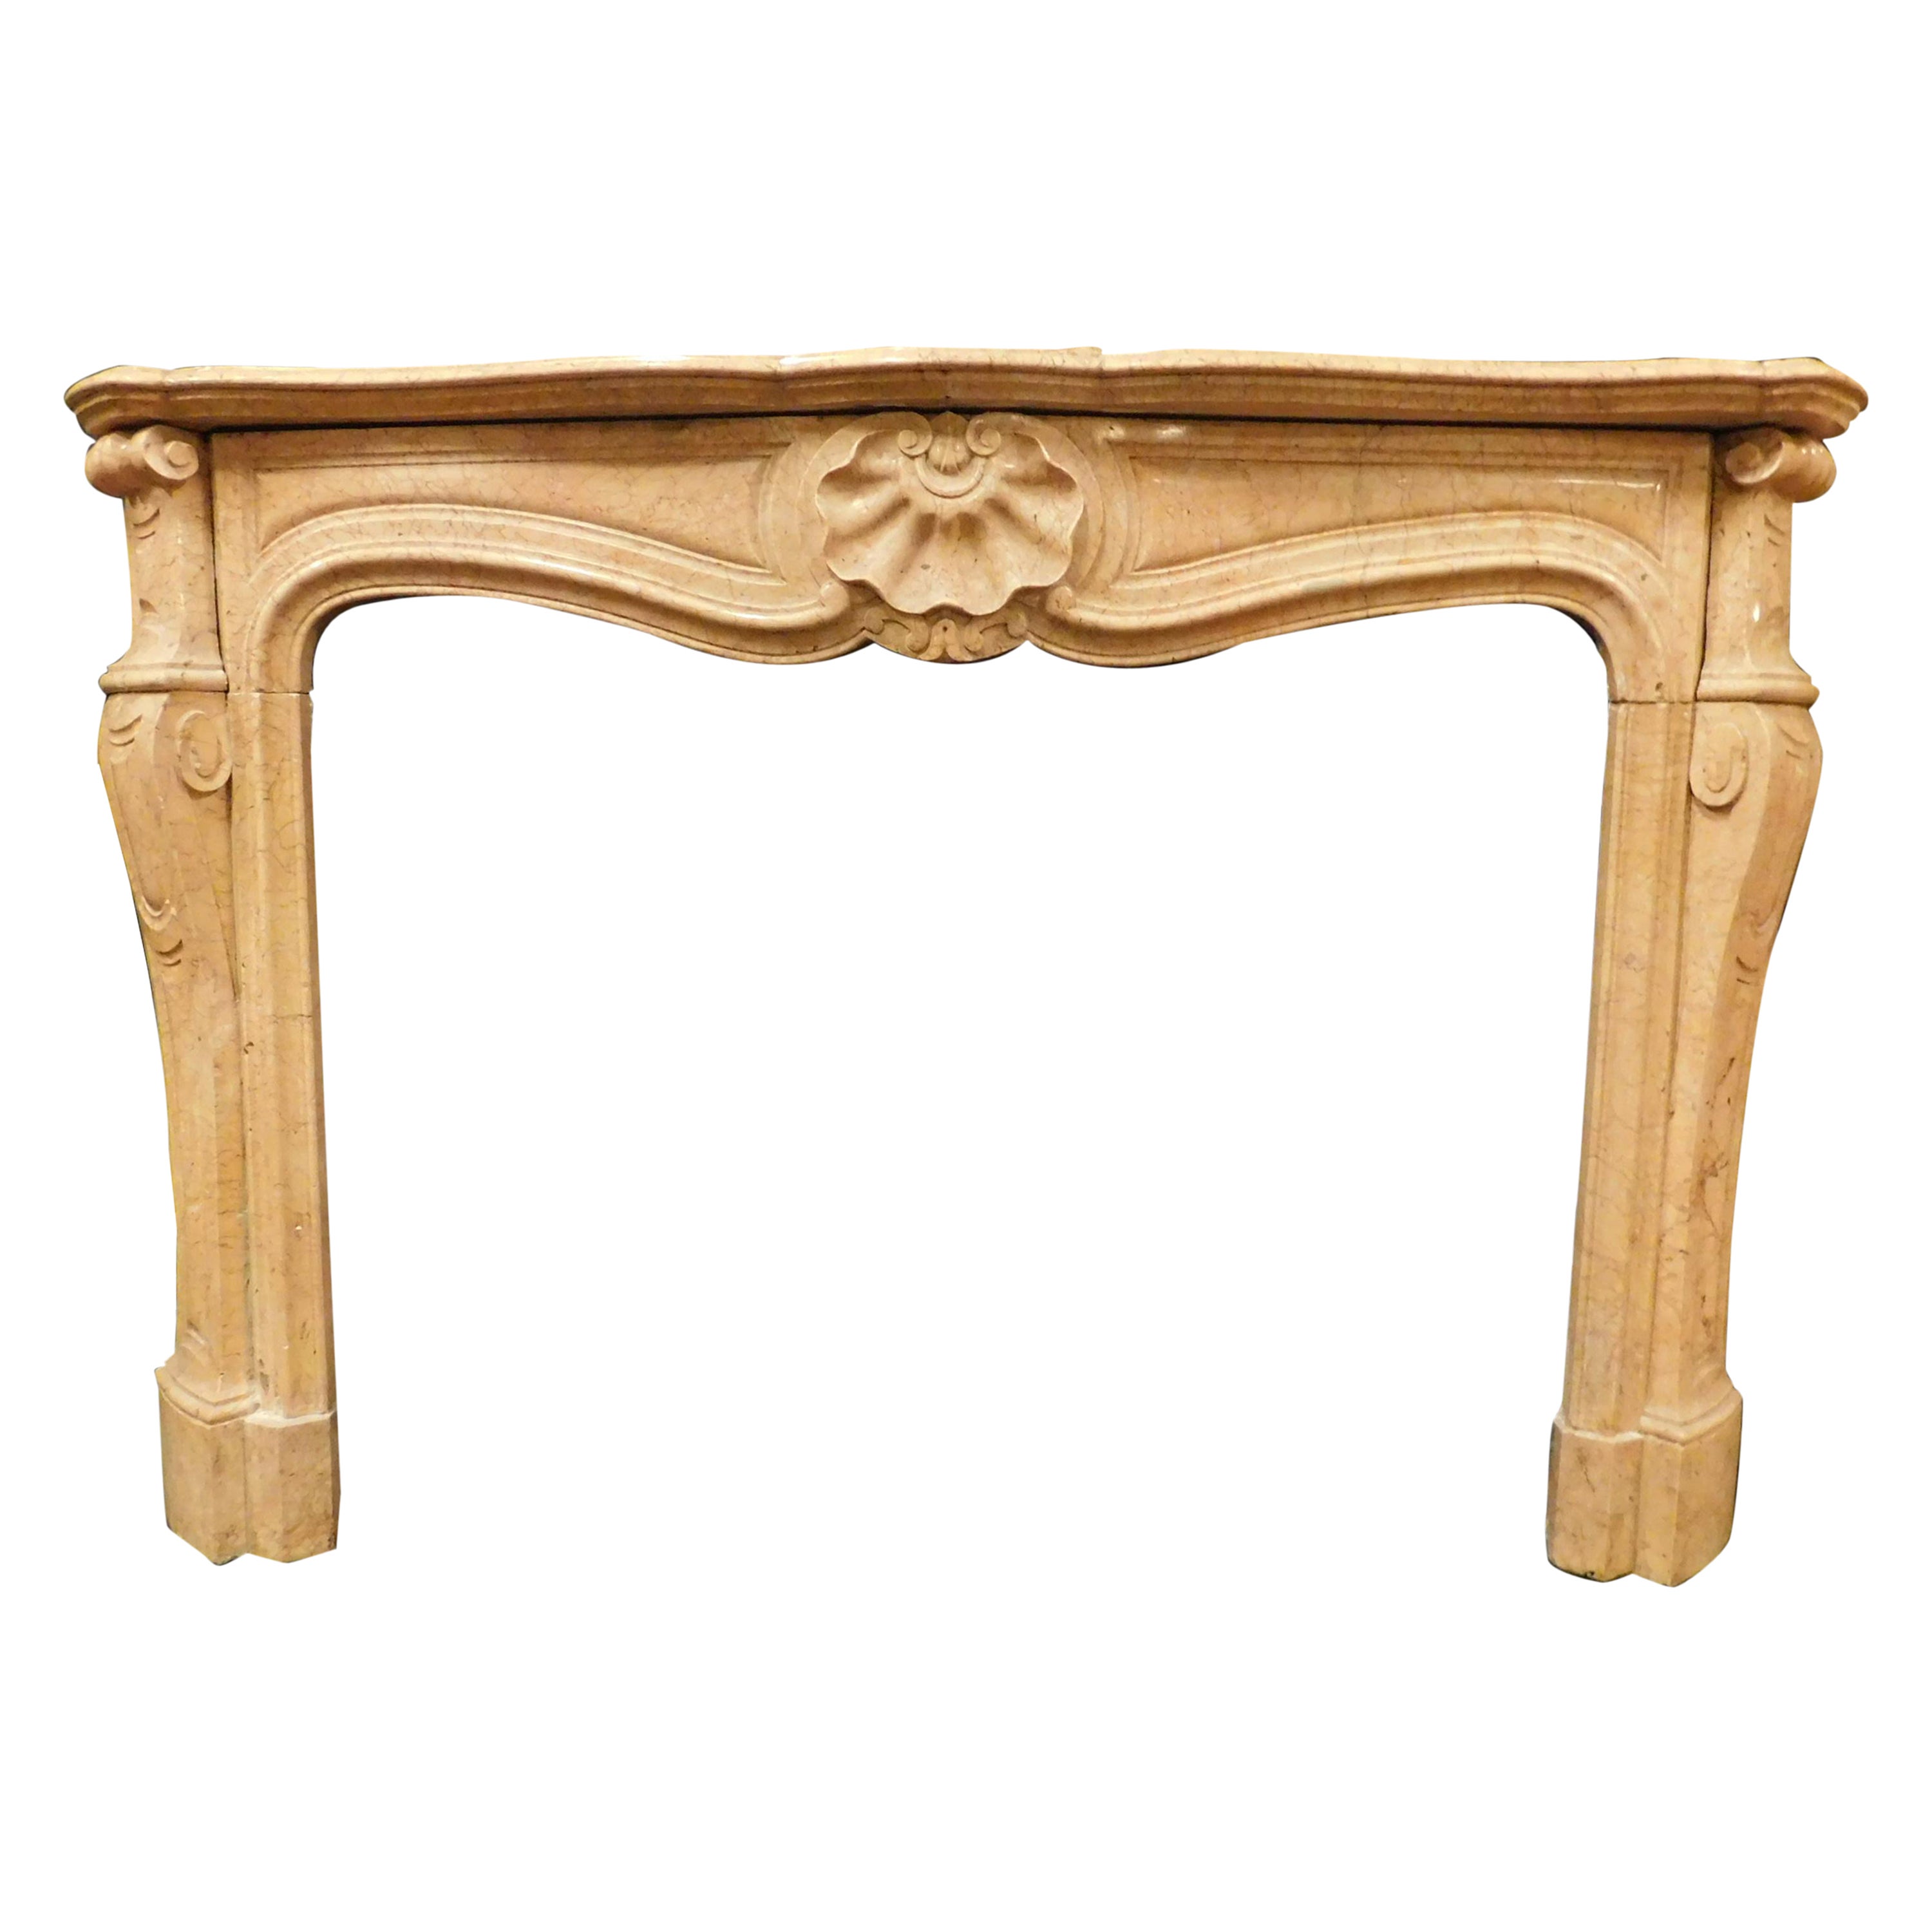 Antique Fireplace in Yellow Breccia Marble, Carved Shell, 19th Century France For Sale